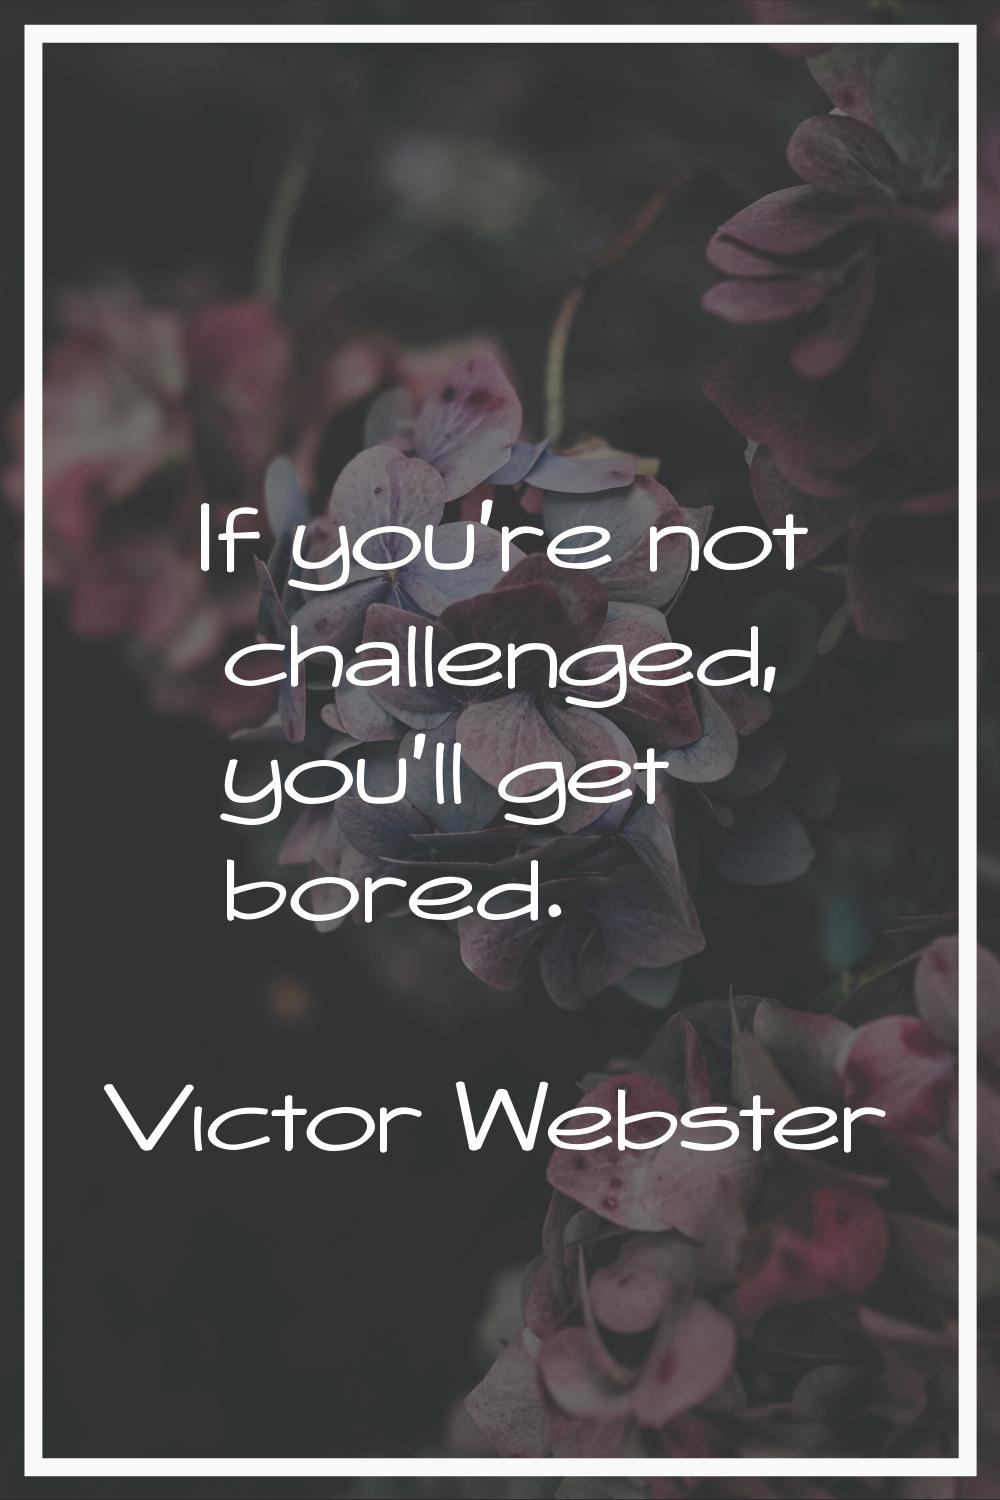 If you're not challenged, you'll get bored.